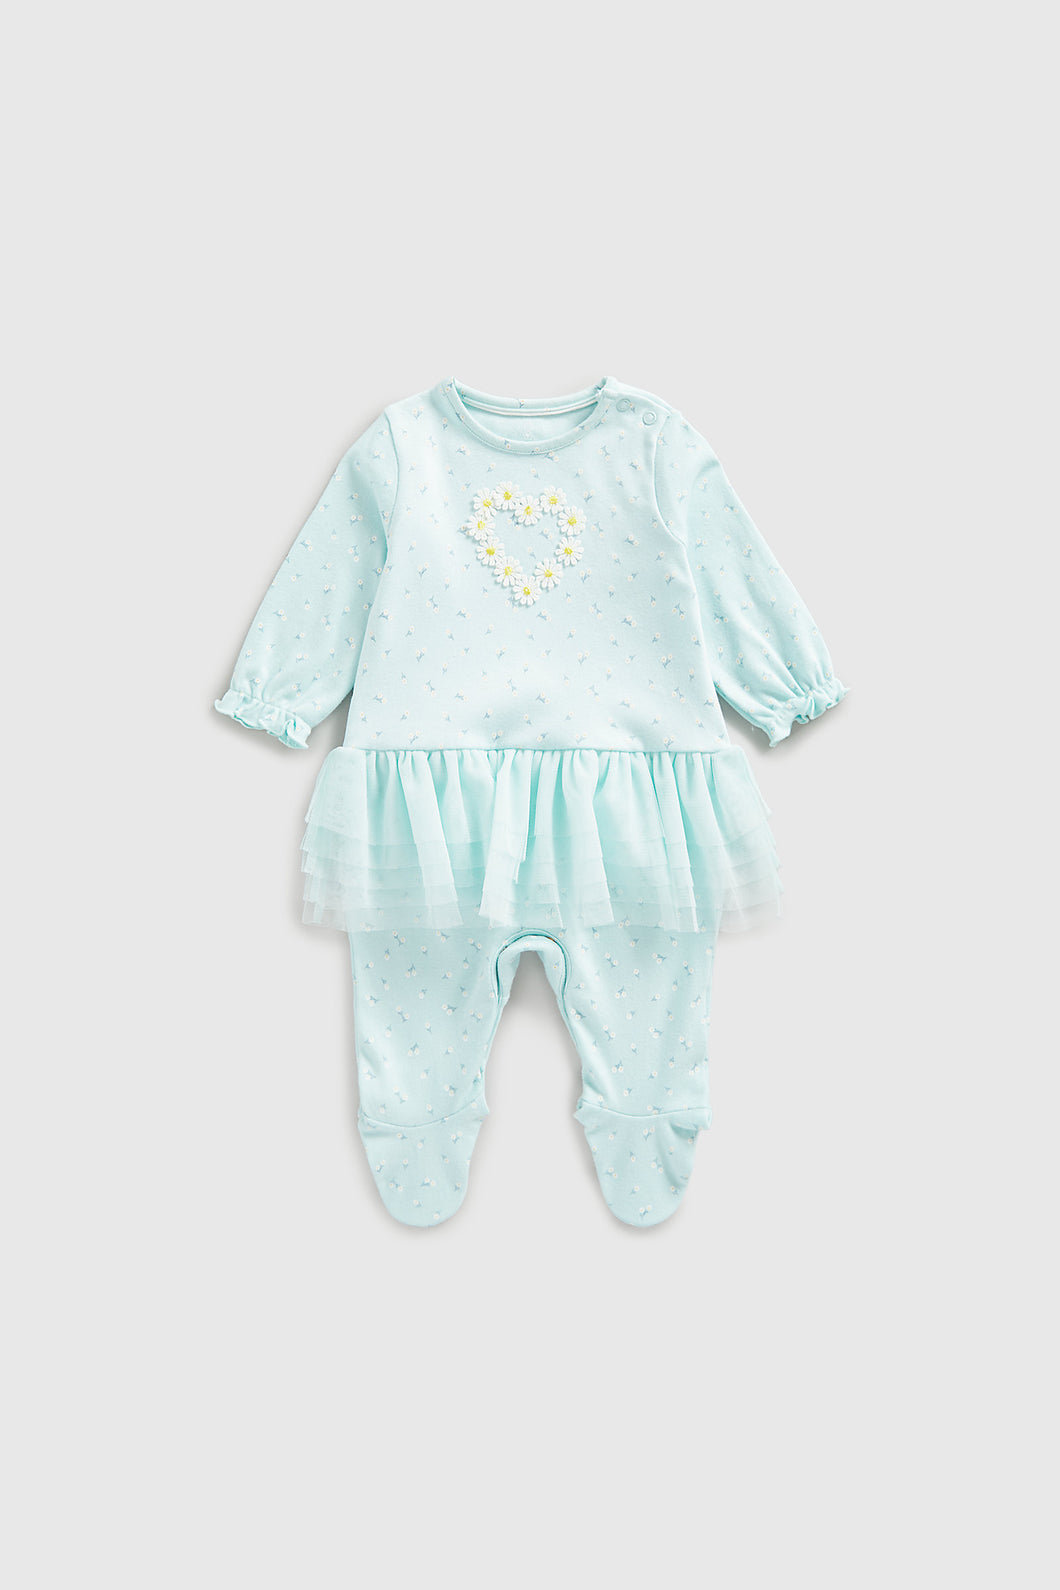 Mothercare Daisy Tutu All-in-One